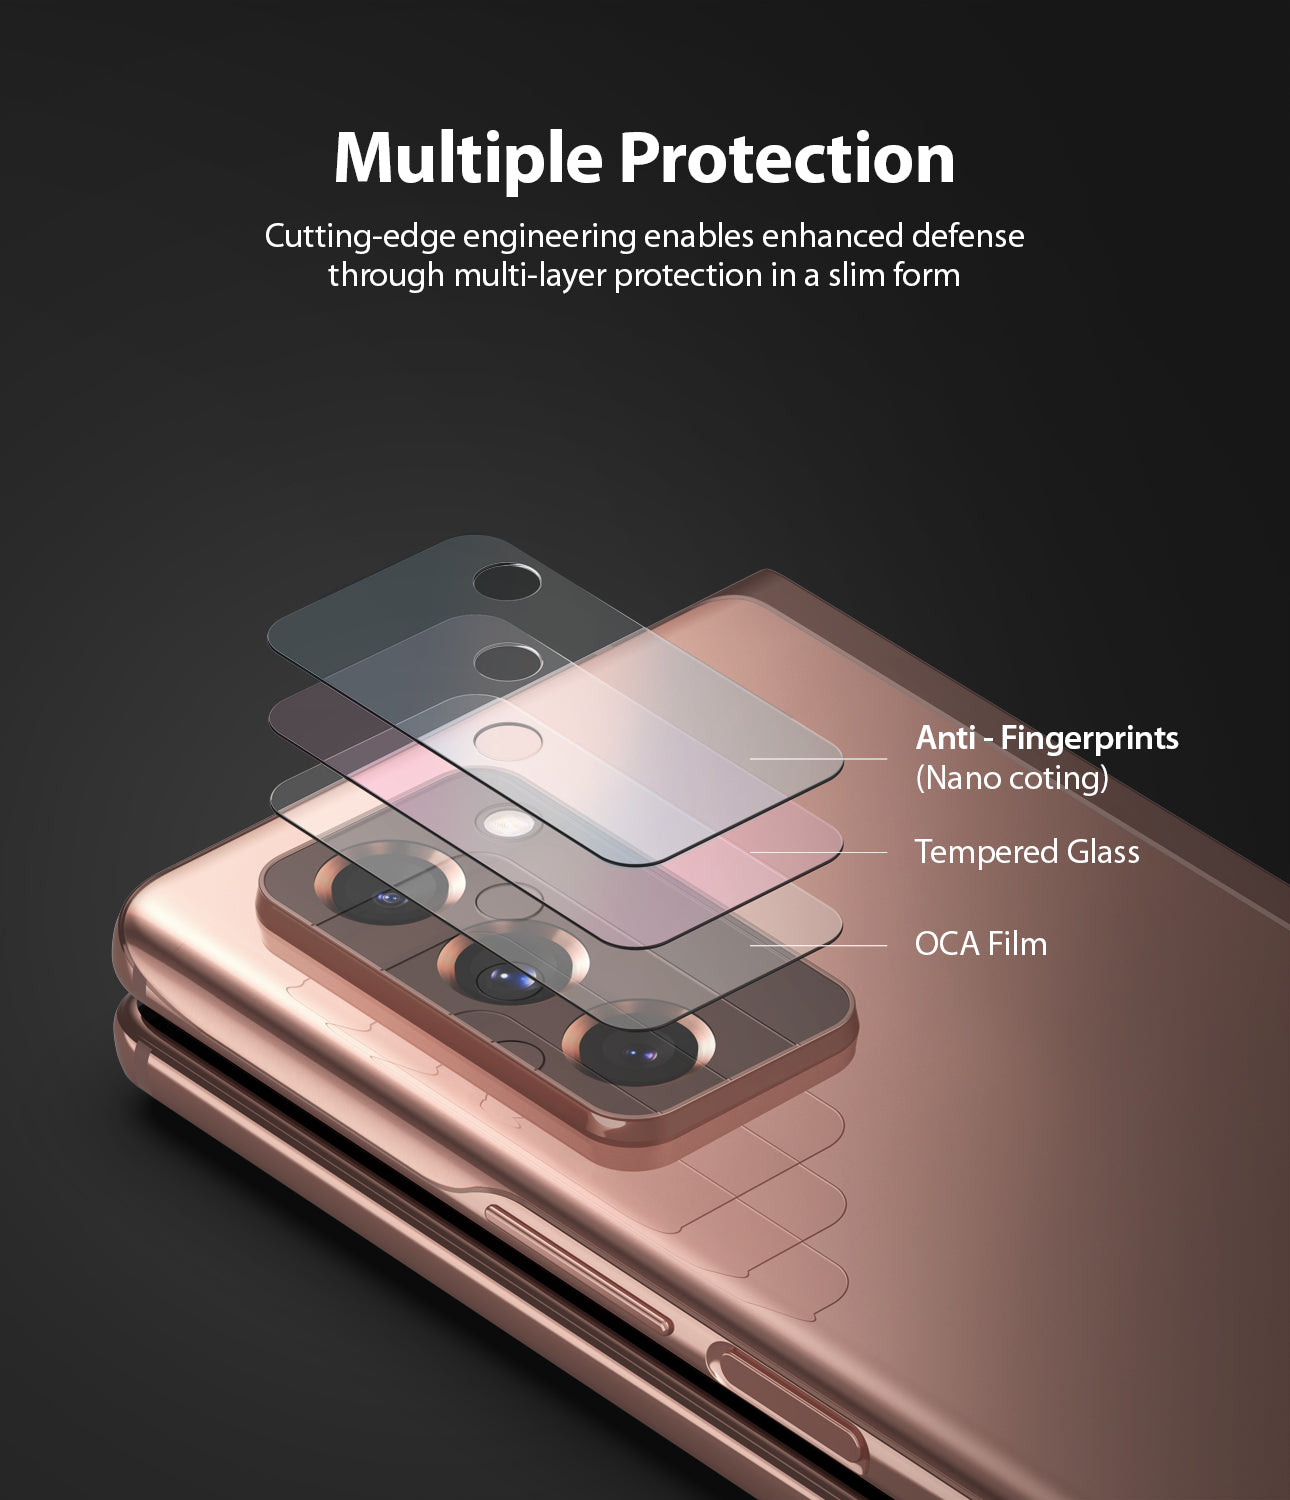 cutting-edge engineering enables enhanced defense through multi-layer protection in a slim form